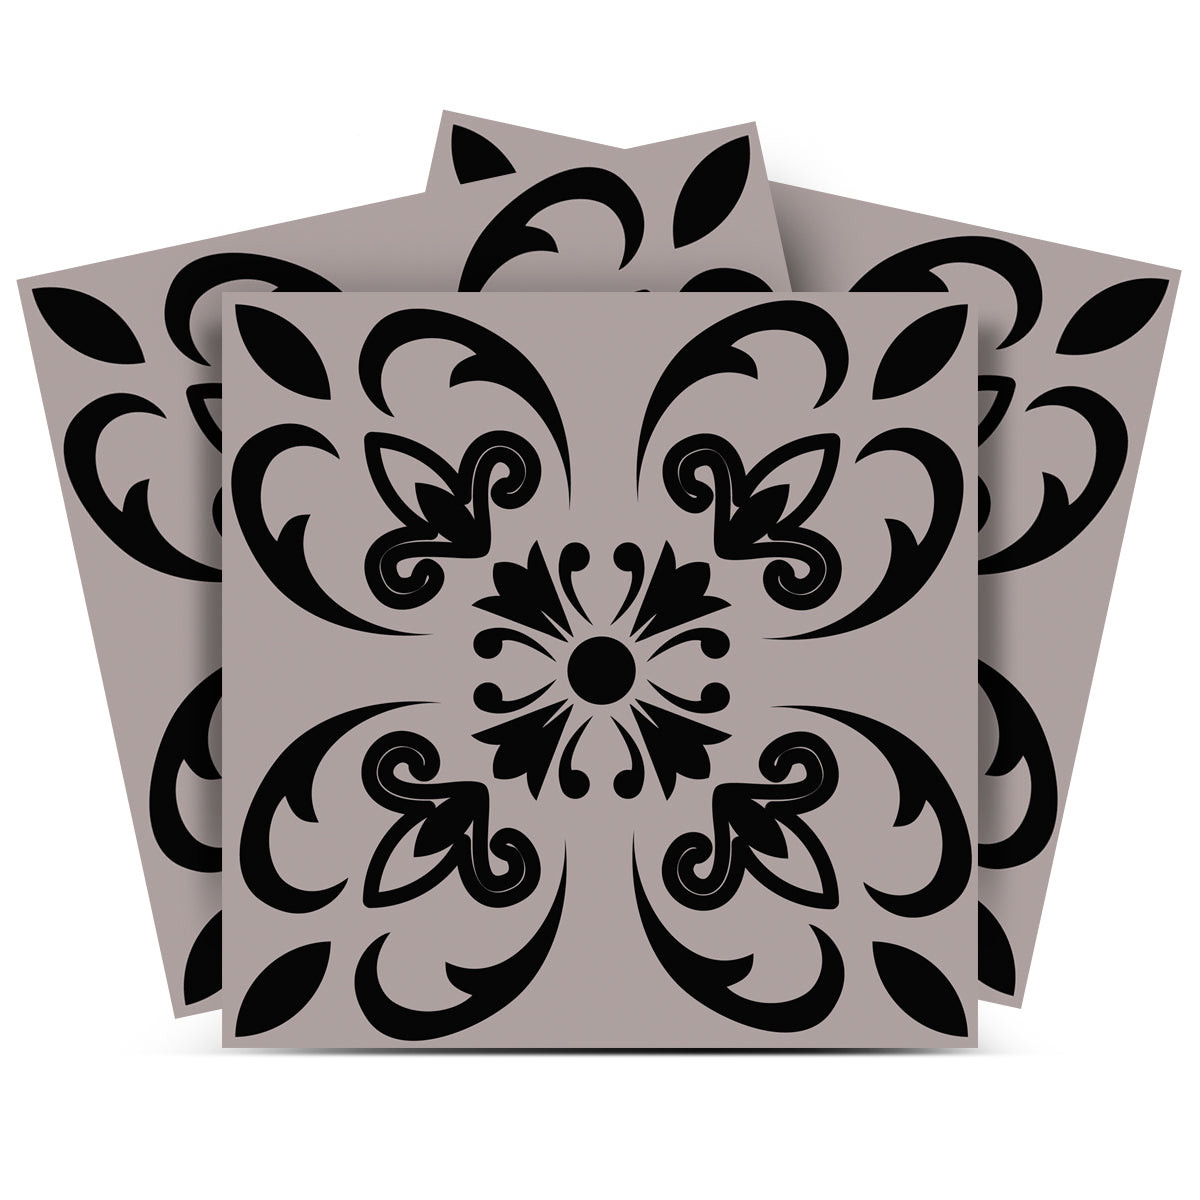 6" X 6" Black And White Orchid Peel And Stick Removable Tiles-390780-1